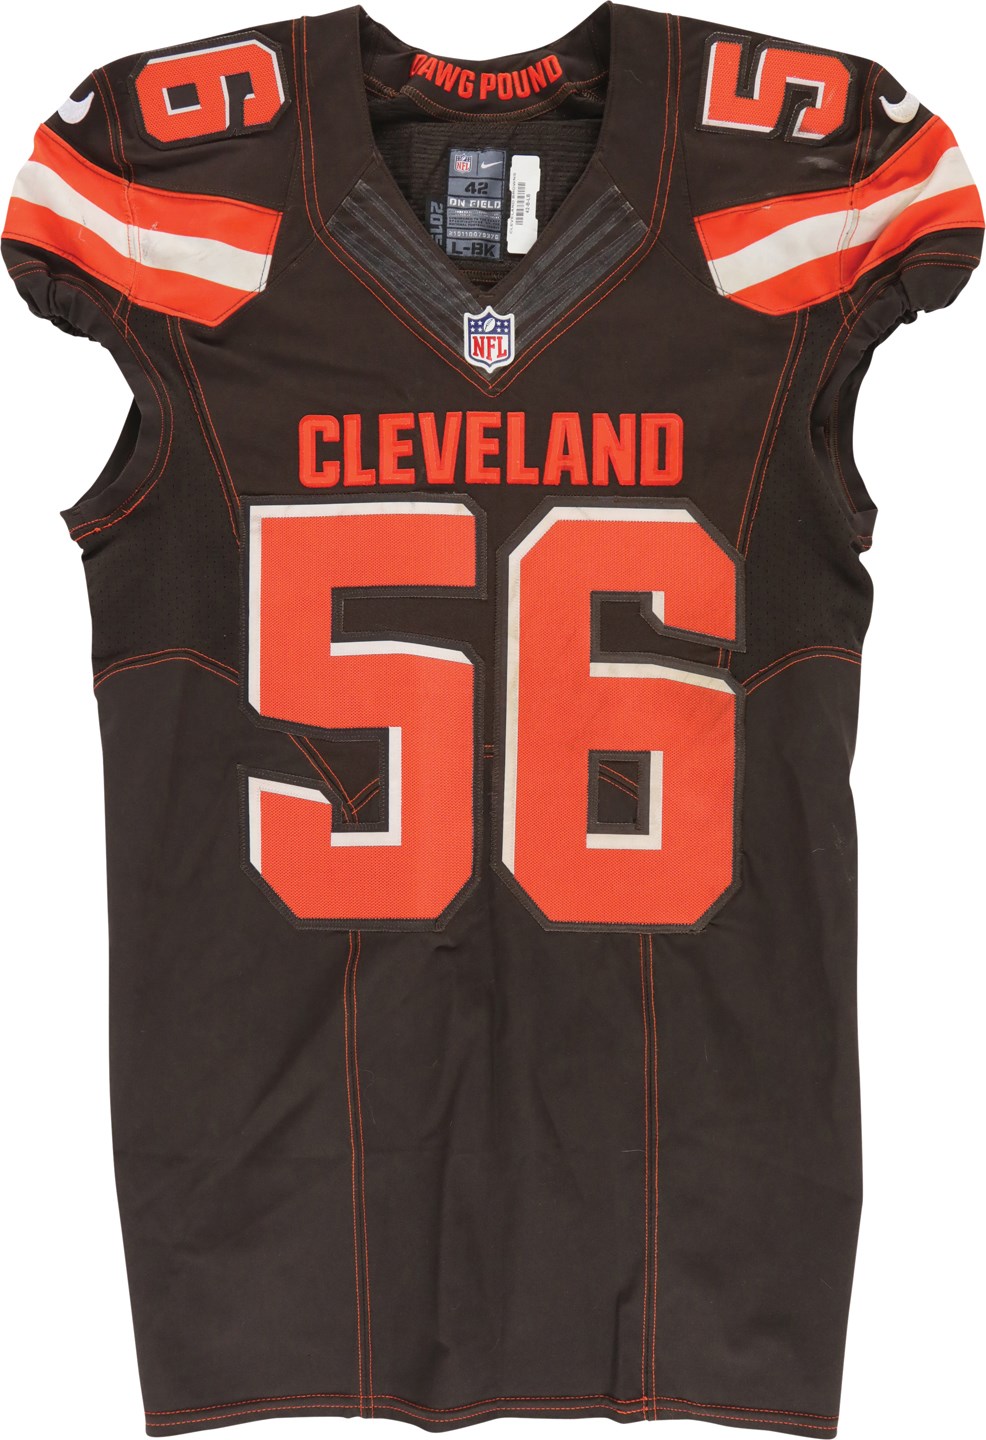 - 11/30/15 Karlos Dansby Unwashed Cleveland Browns Game Worn Jersey - 52 Yard Interception Touchdown! (Photo-Matched)